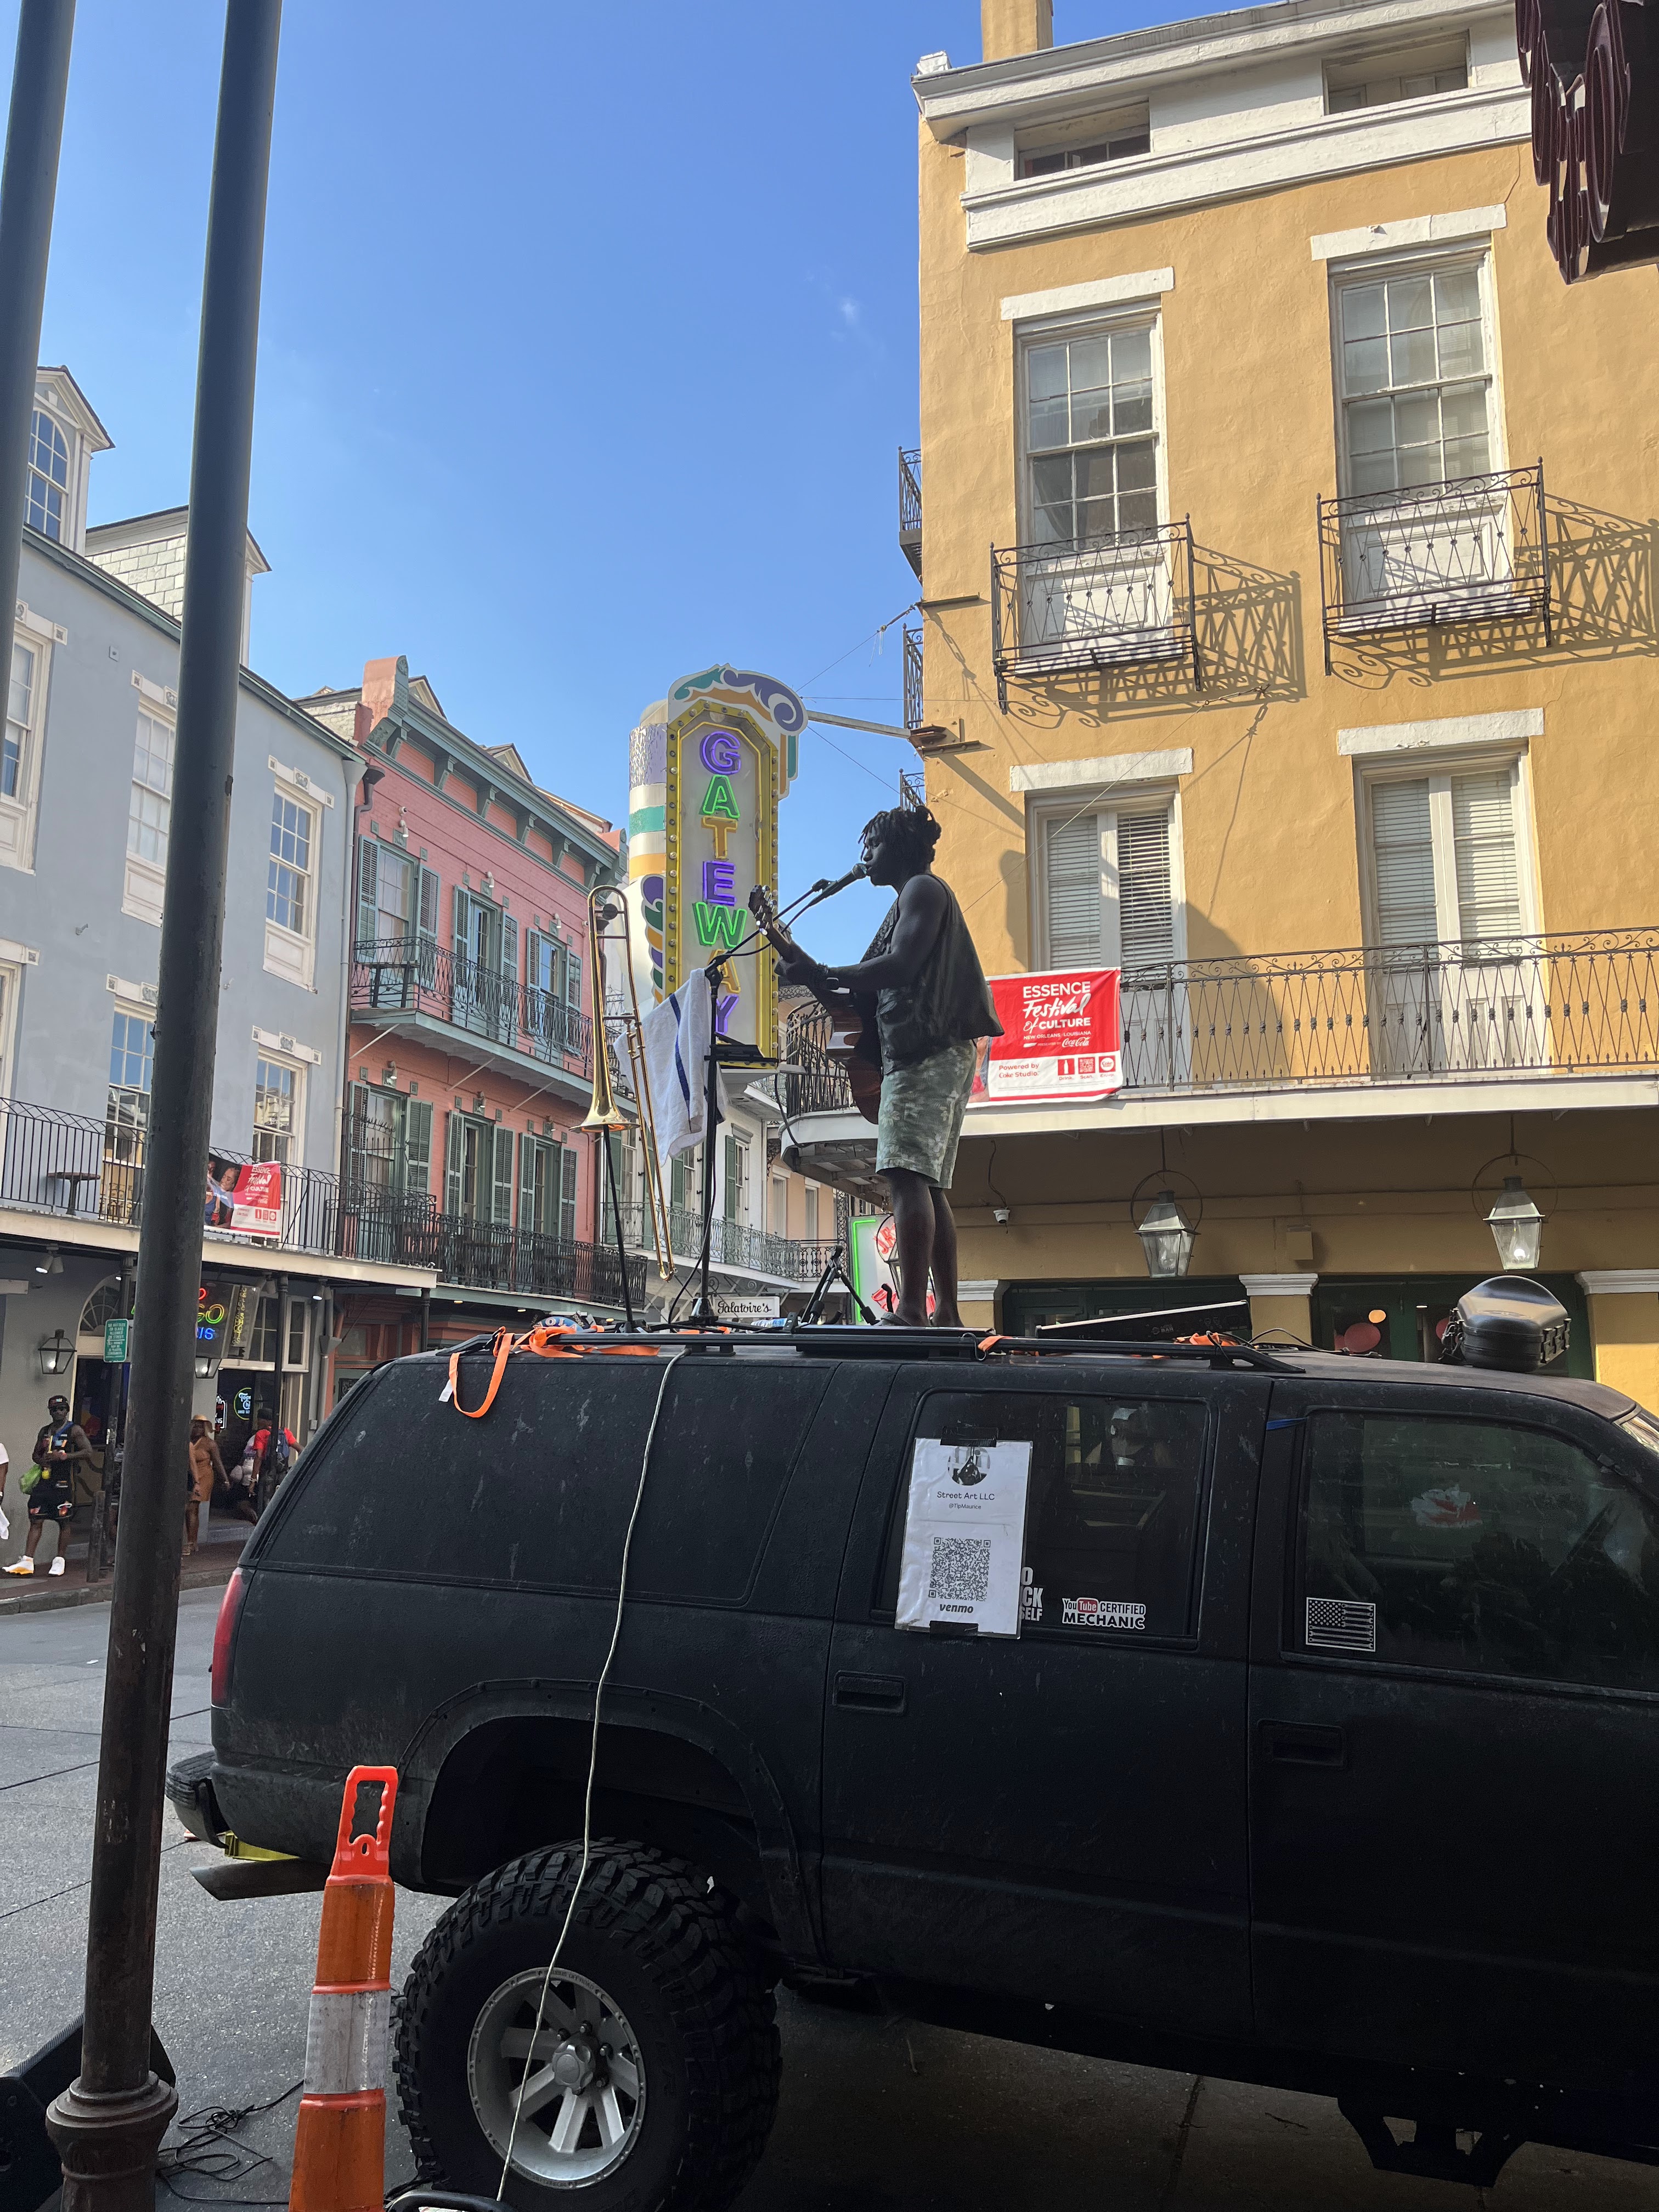 interesting street performer in New Orleans found on vacation